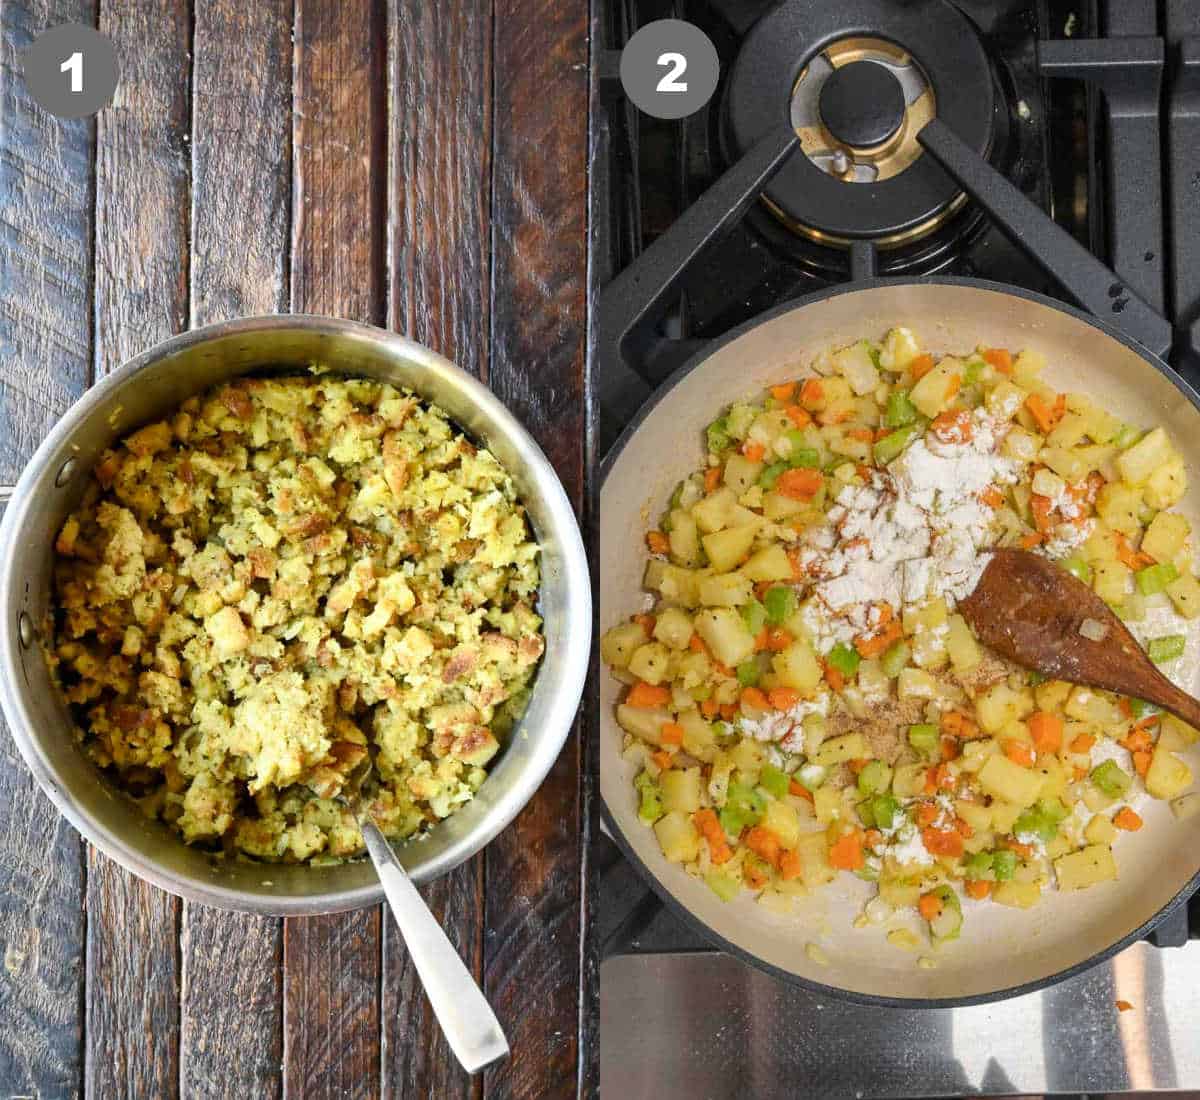 Stuffing that was made in a saucepan then the veggies added to a skillet to cook.